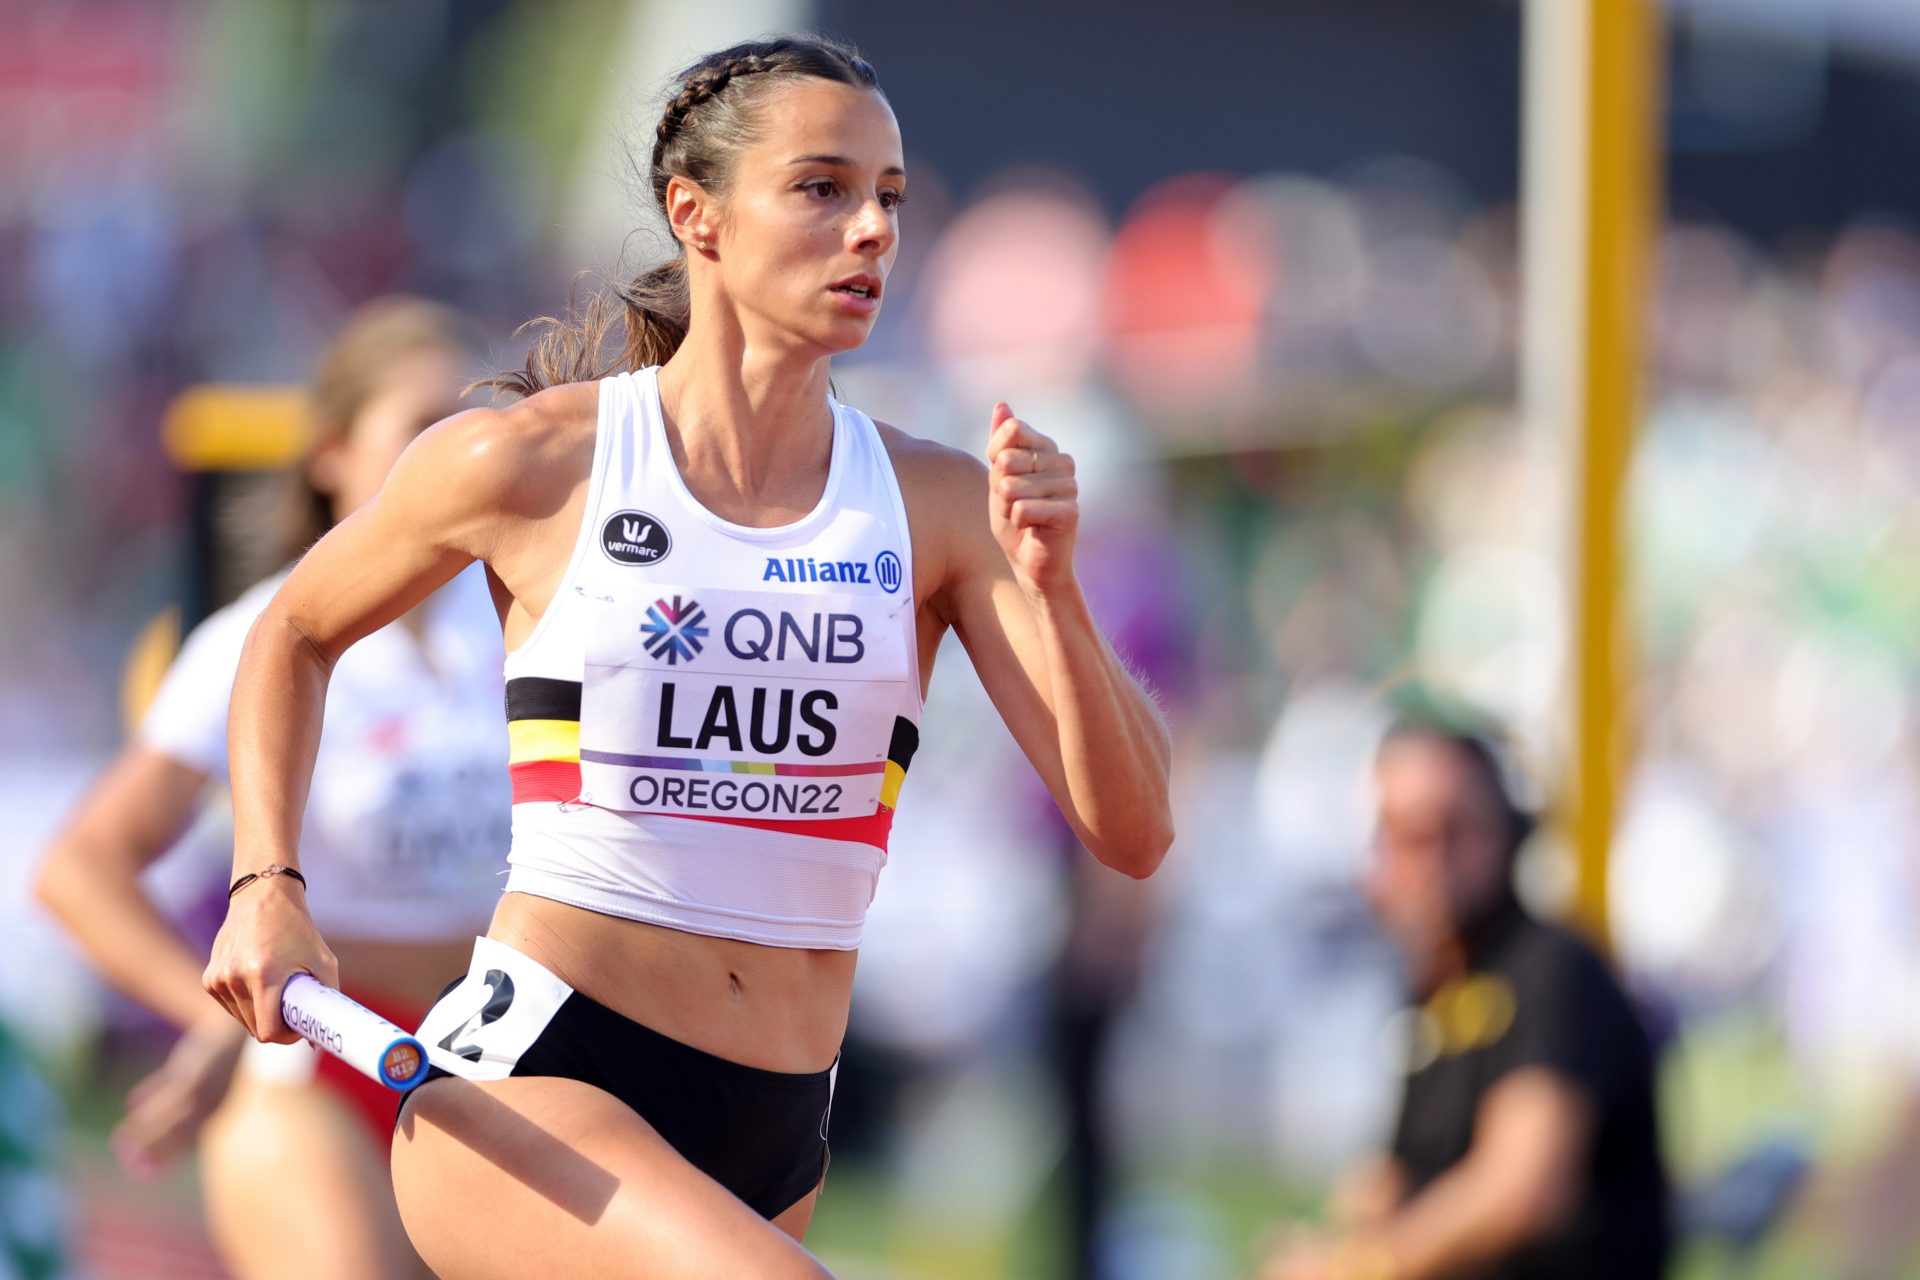 Camille Laus: Belgium's relay captain chasing her Olympic dream